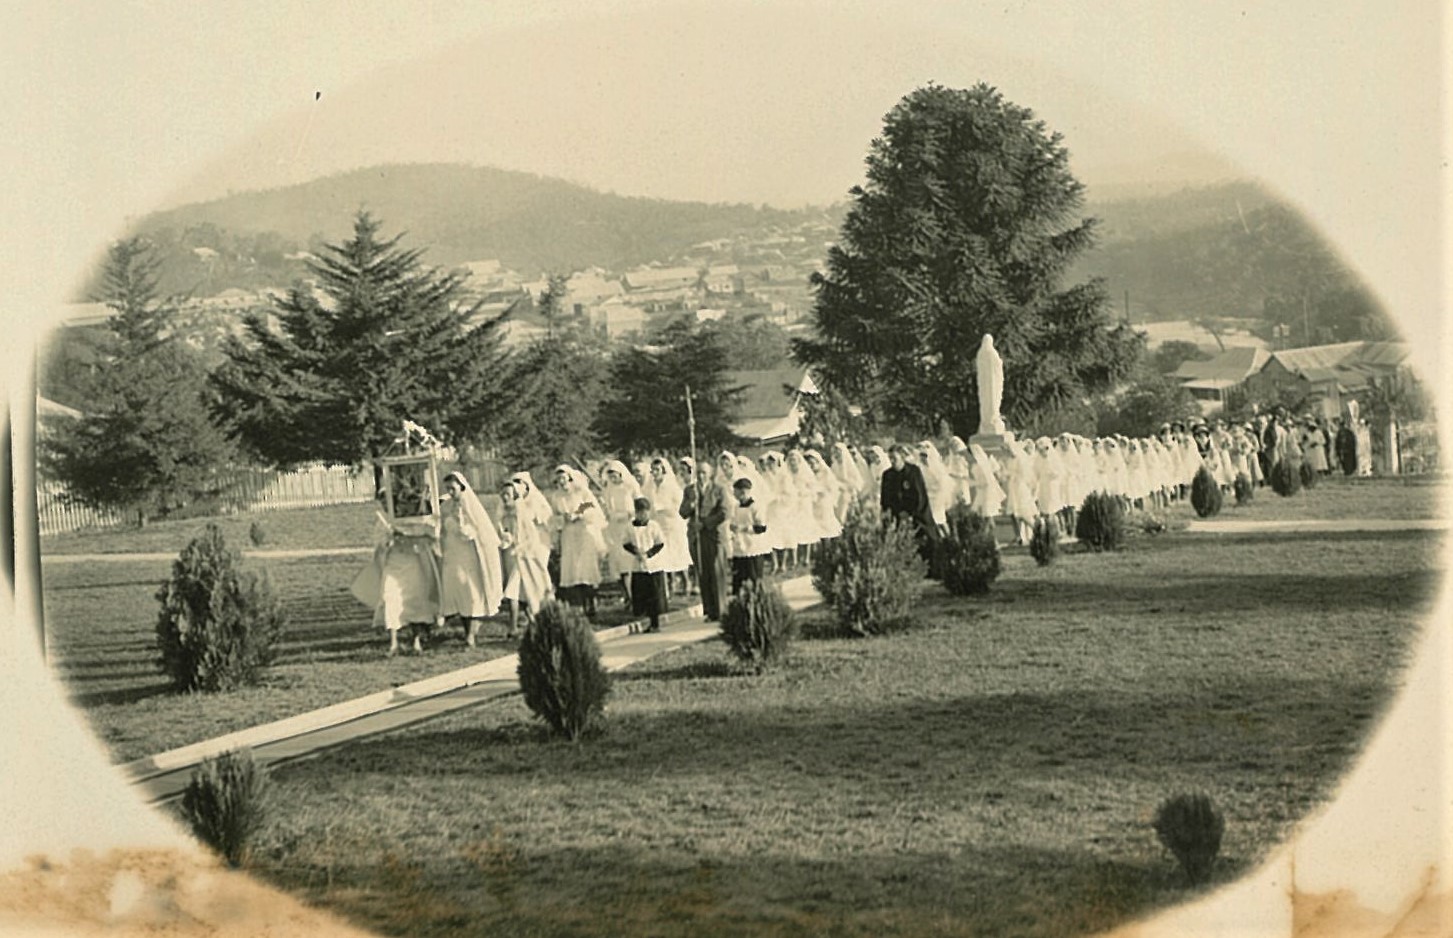 1960 Feast of Christ the kIng, procession to MSB